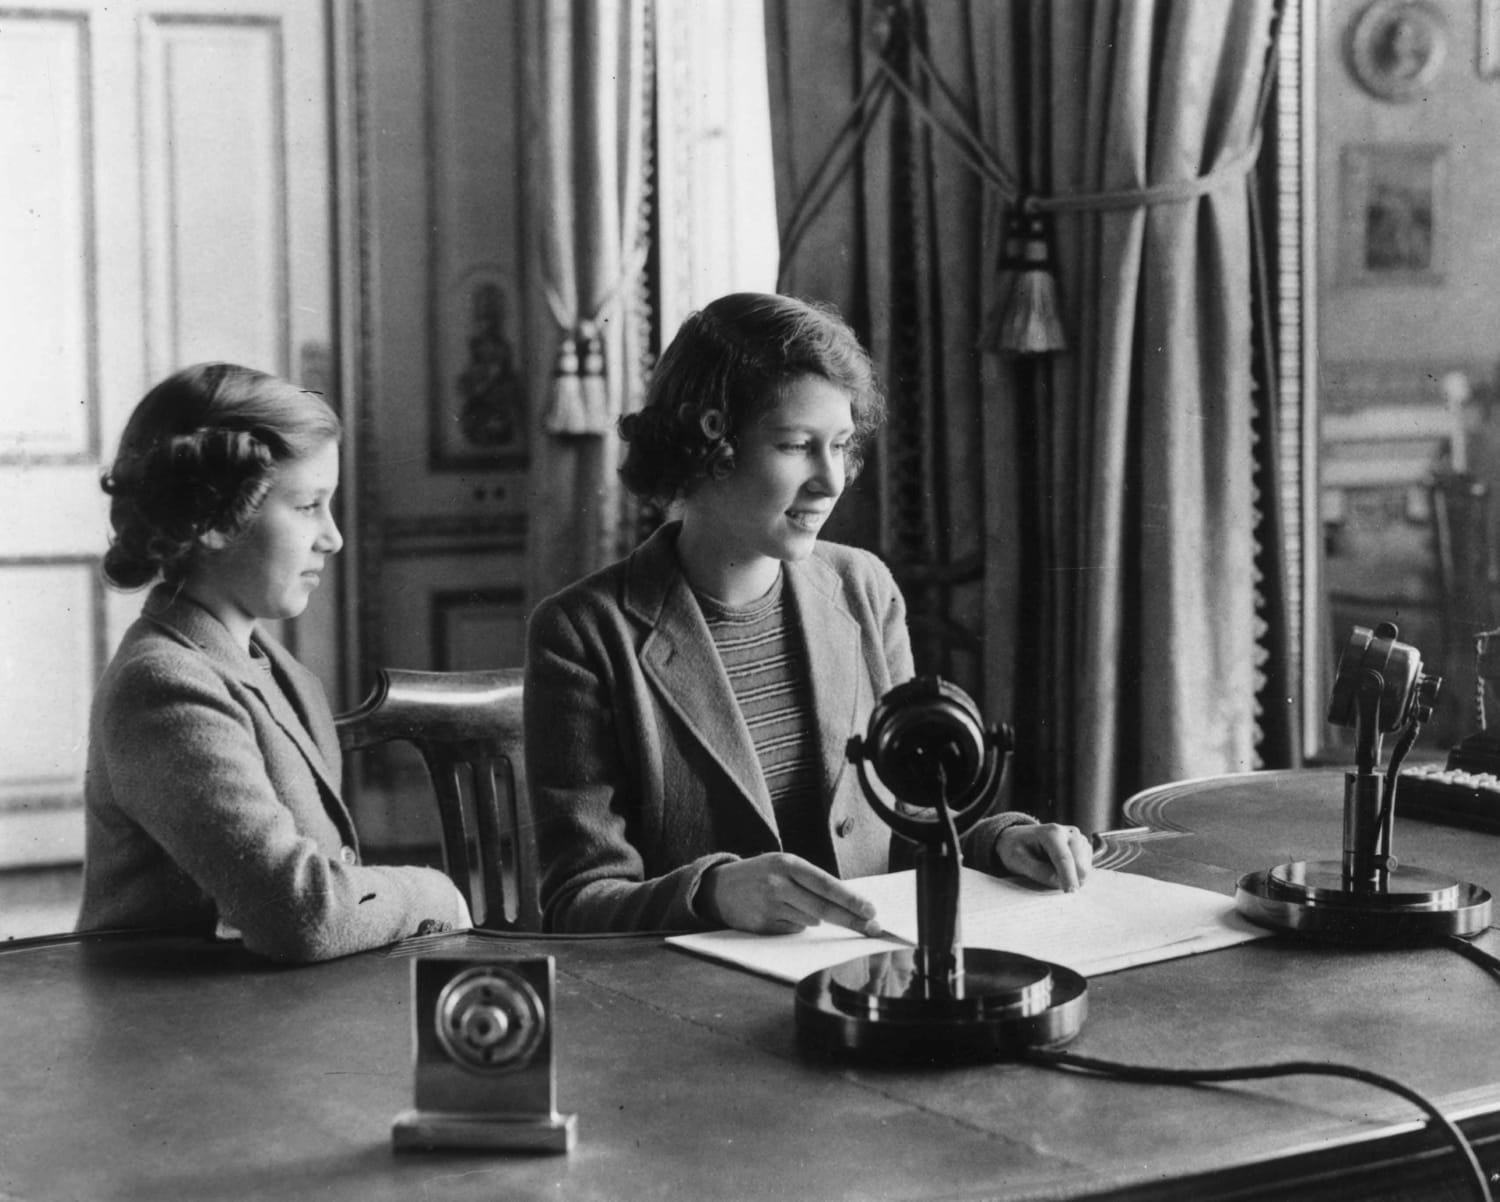 Princess Elizabeth makes her first broadcast accompanied by her sister Princess Margaret, 1940.